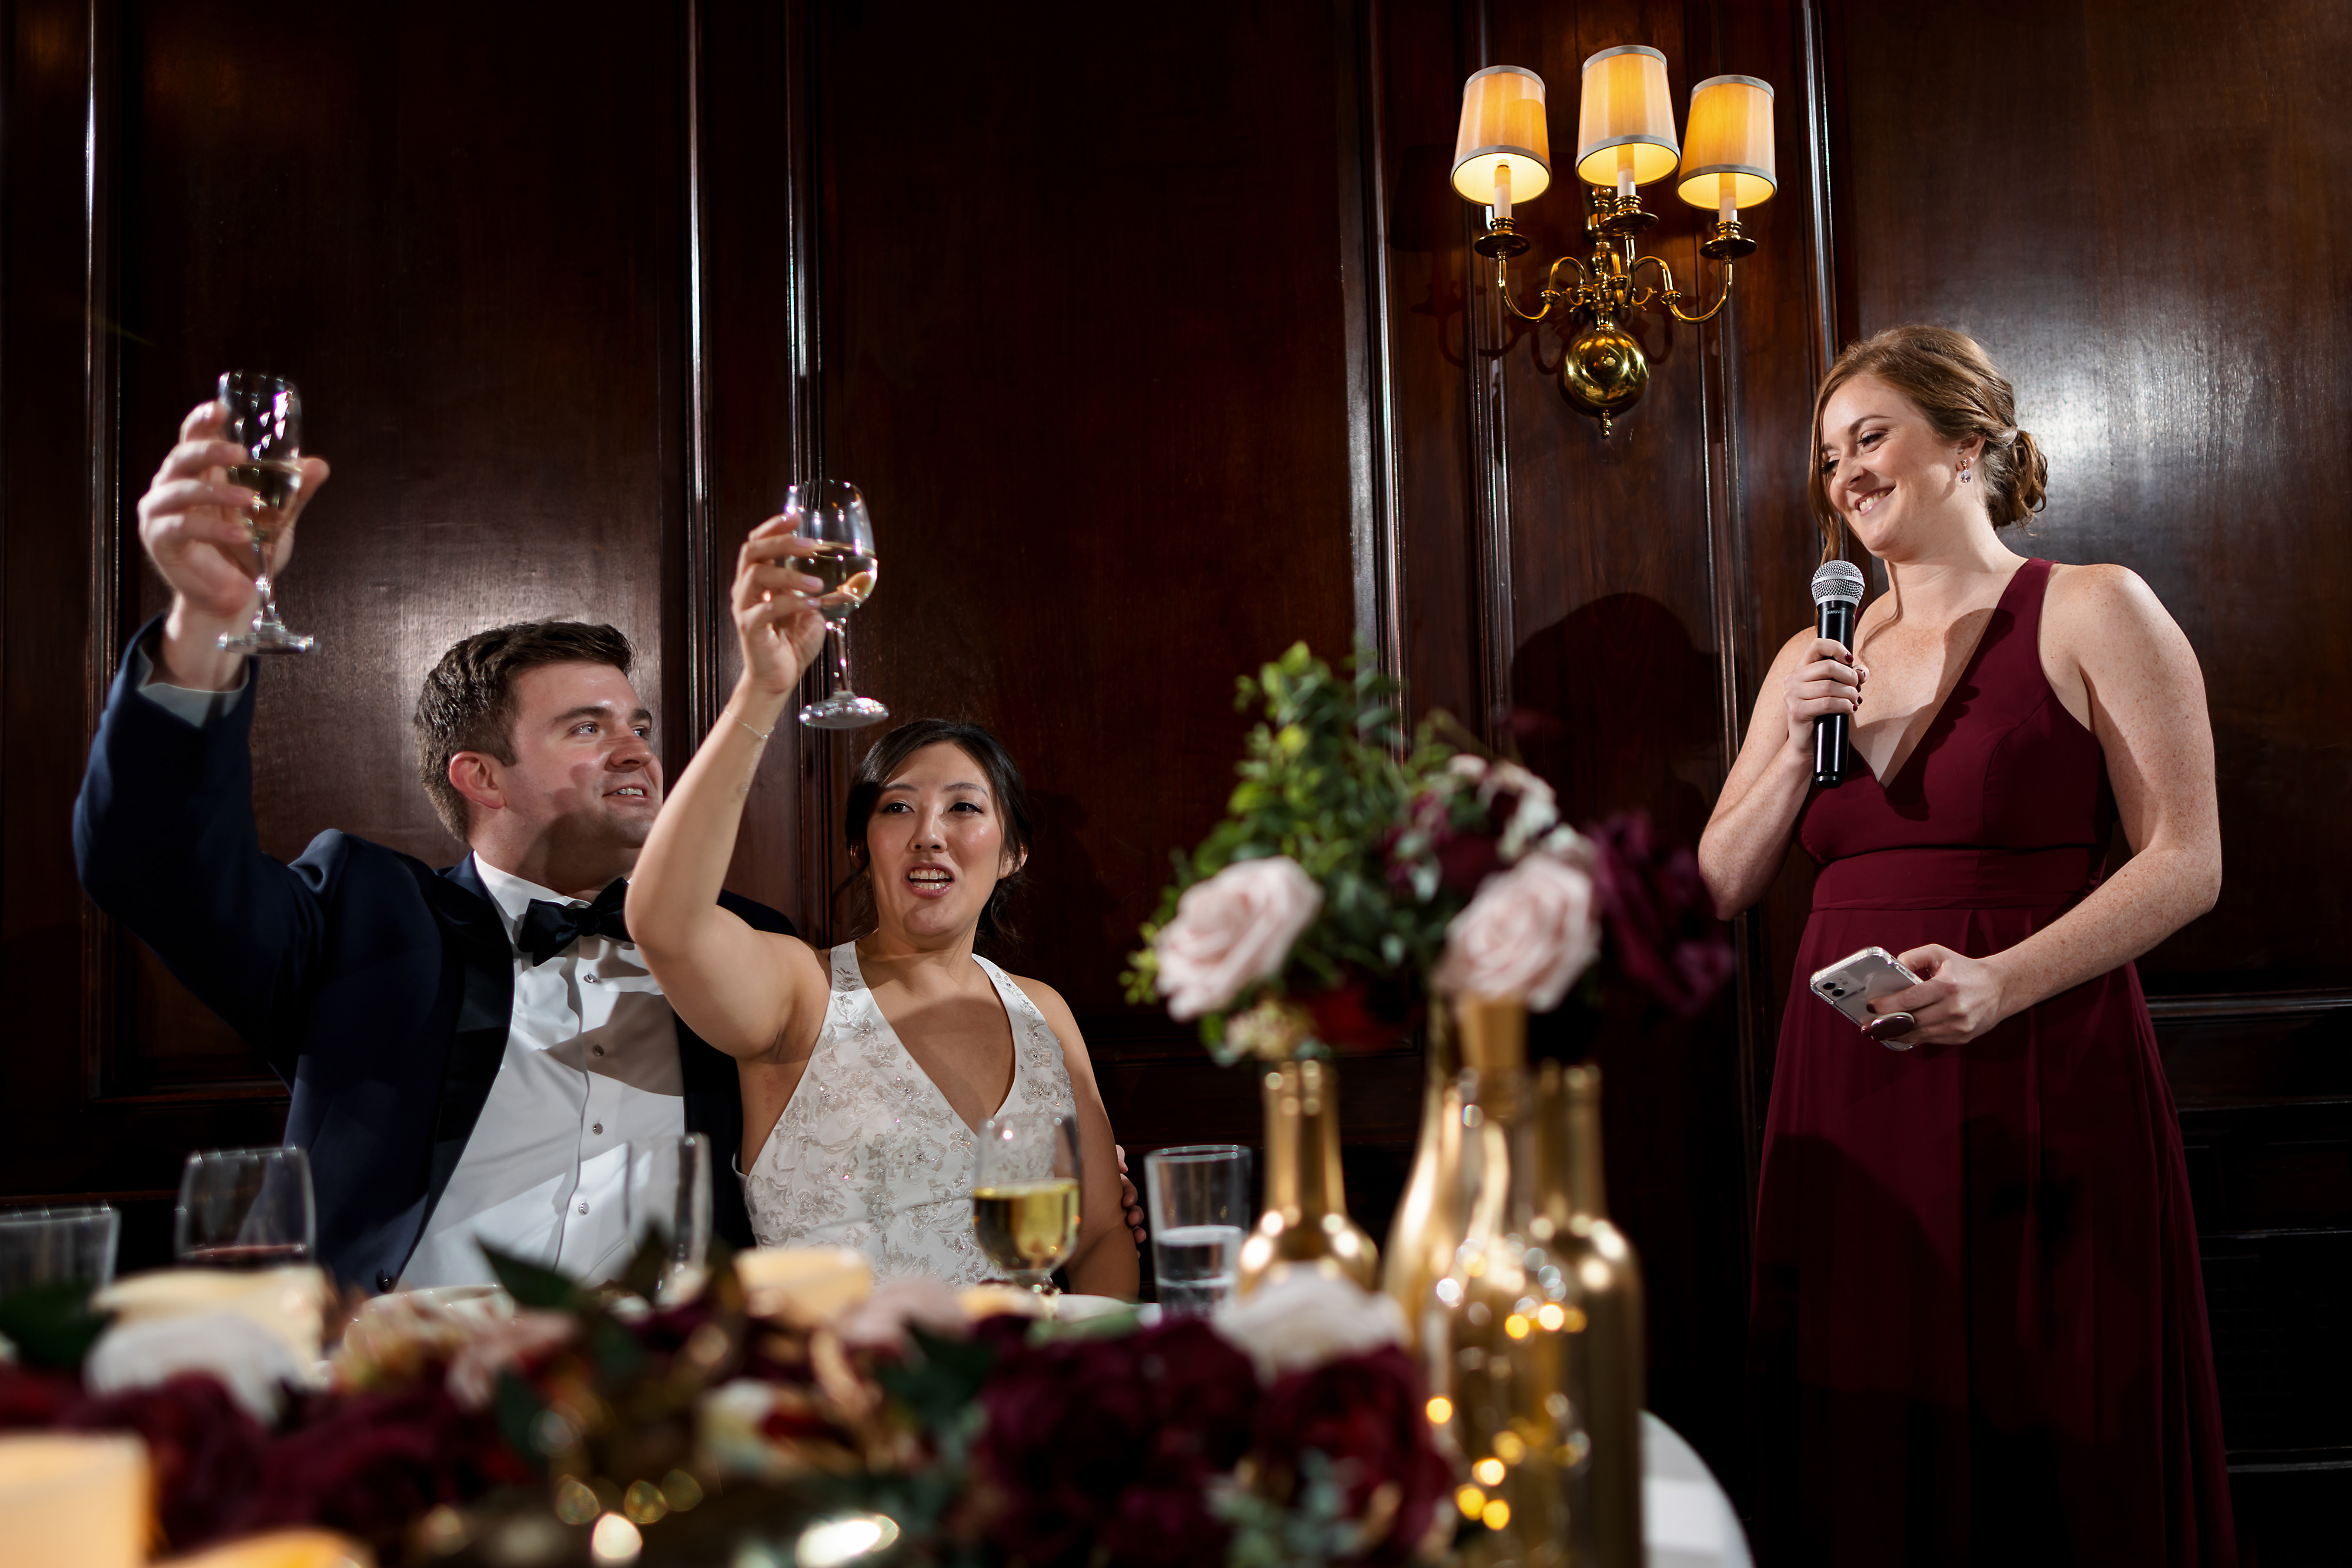 sister gives toast during wedding reception at Salvatore's